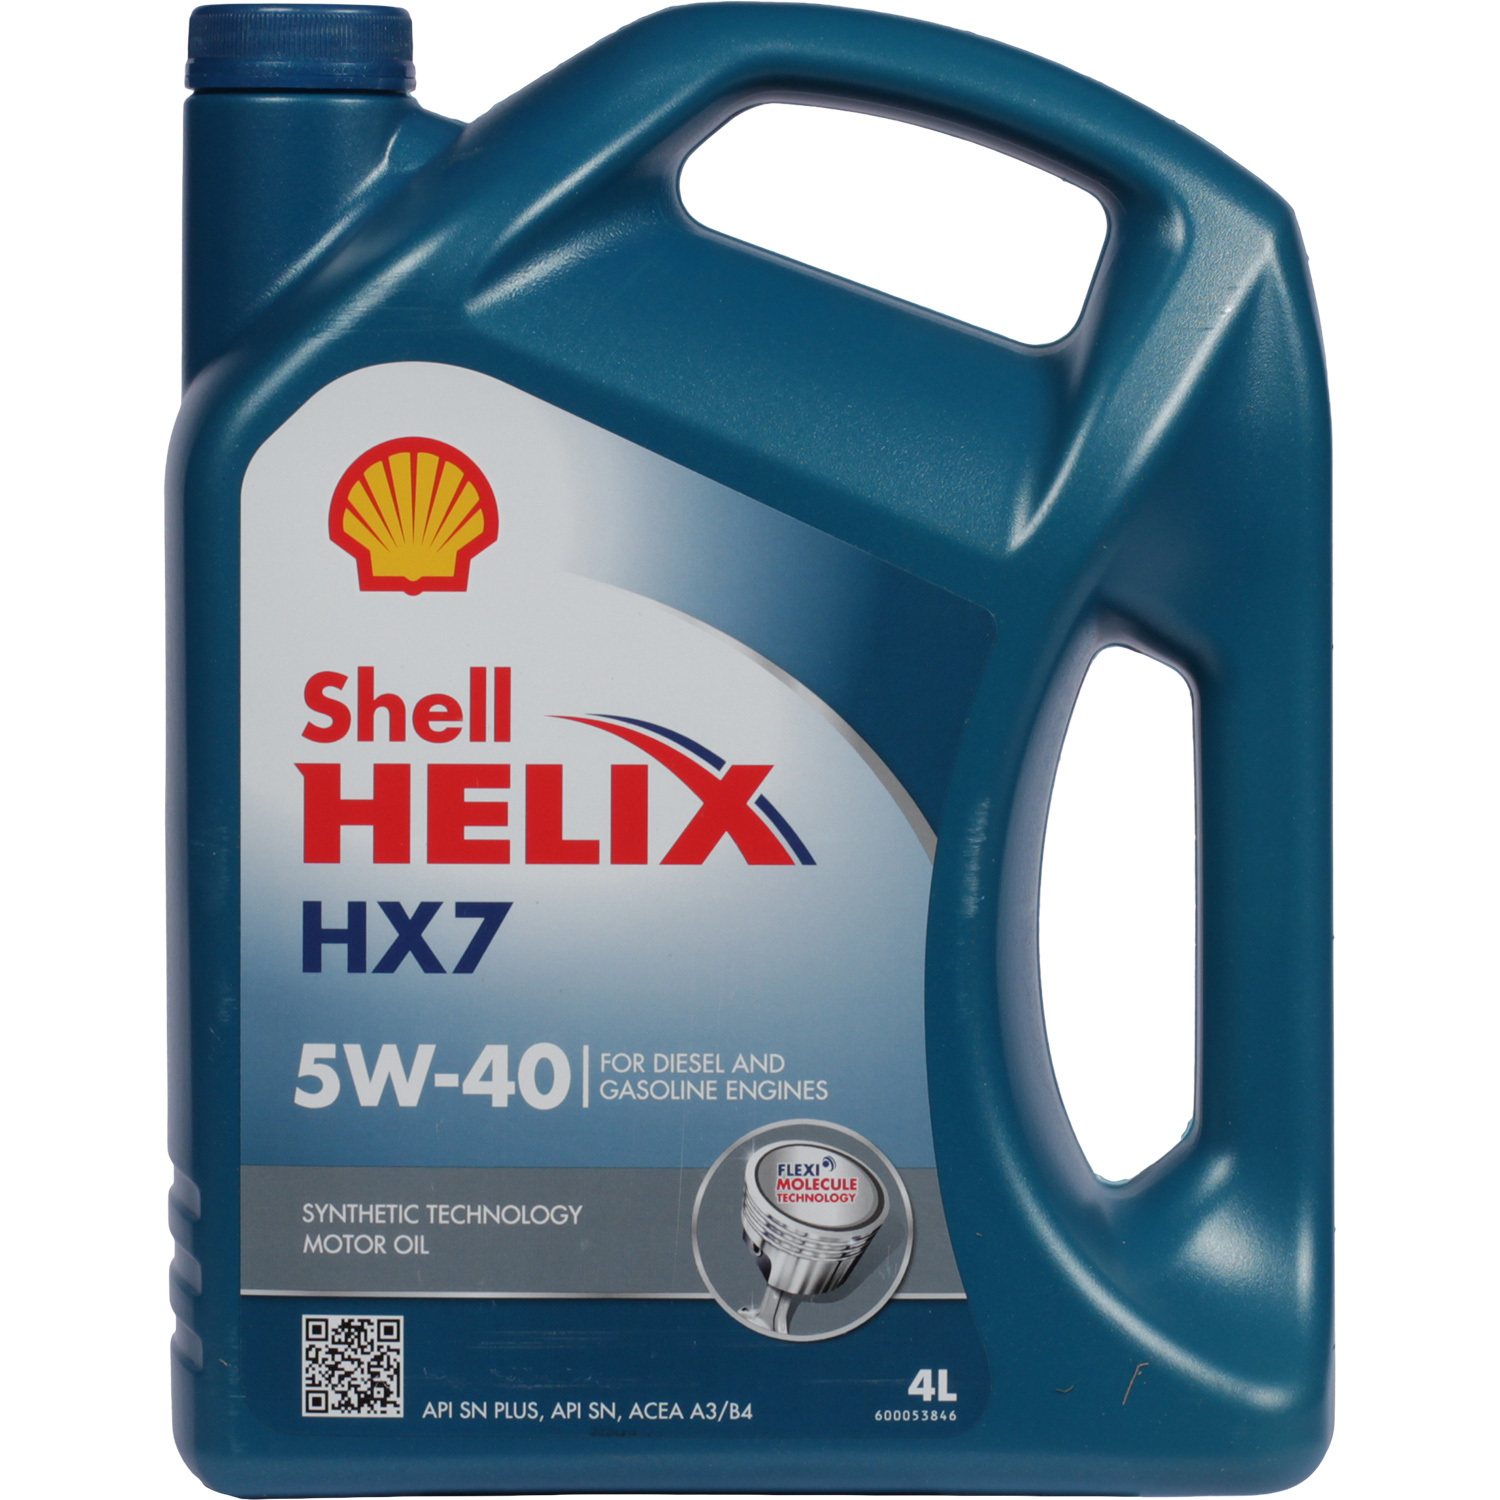 Shell Моторное масло Shell Helix HX7 5W-40, 4 л масло моторное shell helix ultra 5w 30 4 л